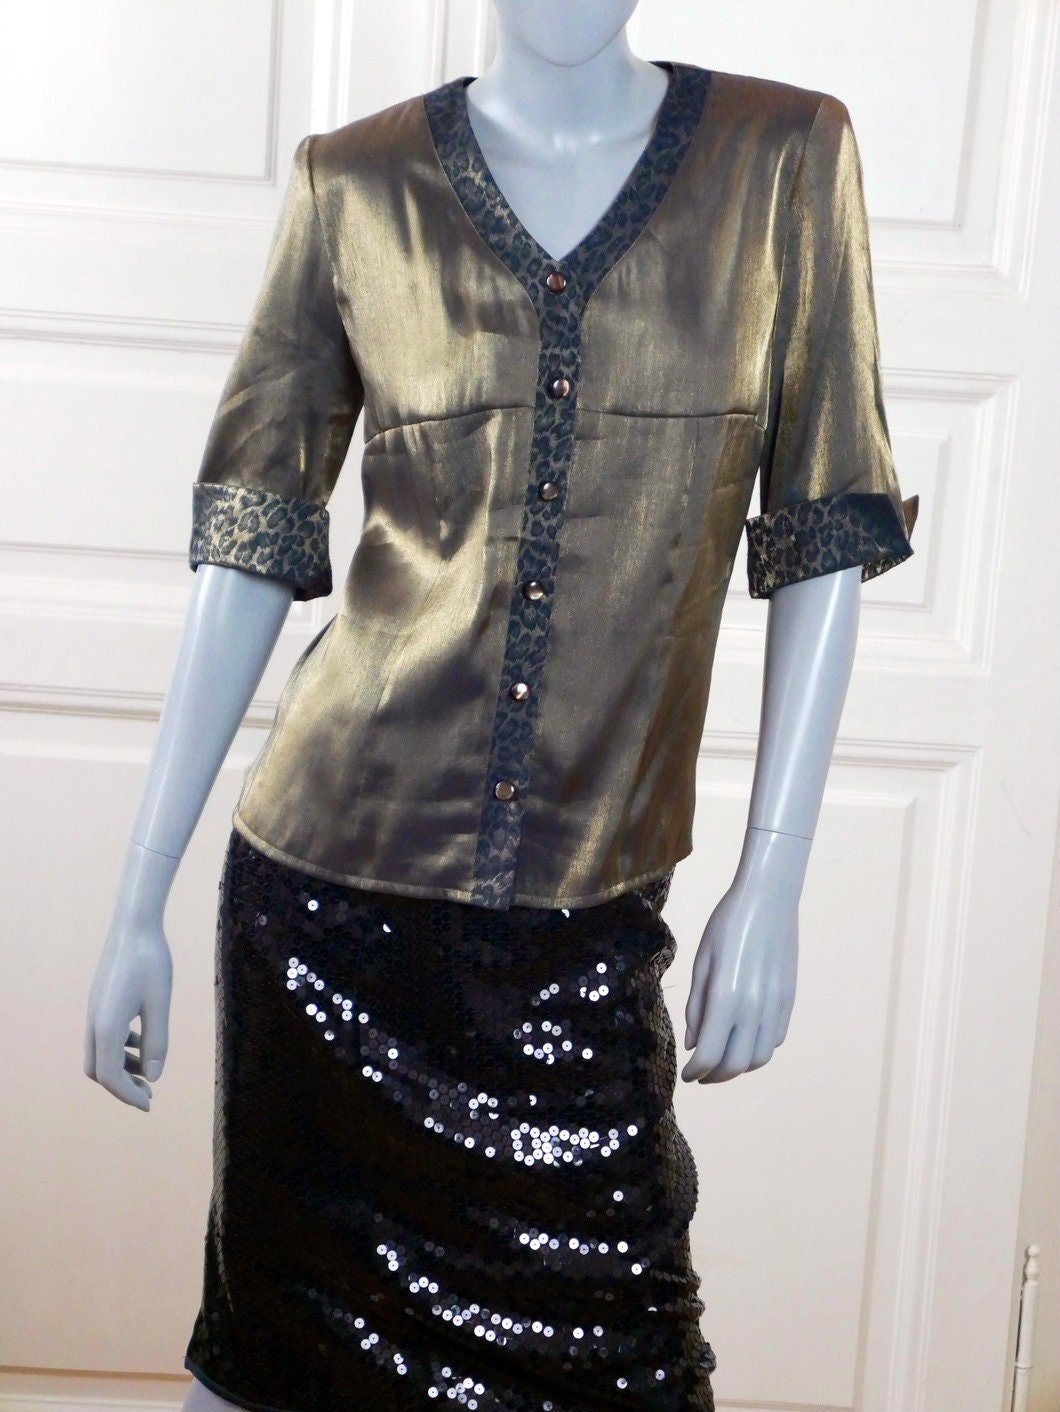 1980s Dark Gold Silk Blouse | Short Sleeve Top with Leopard Print Accents | Large